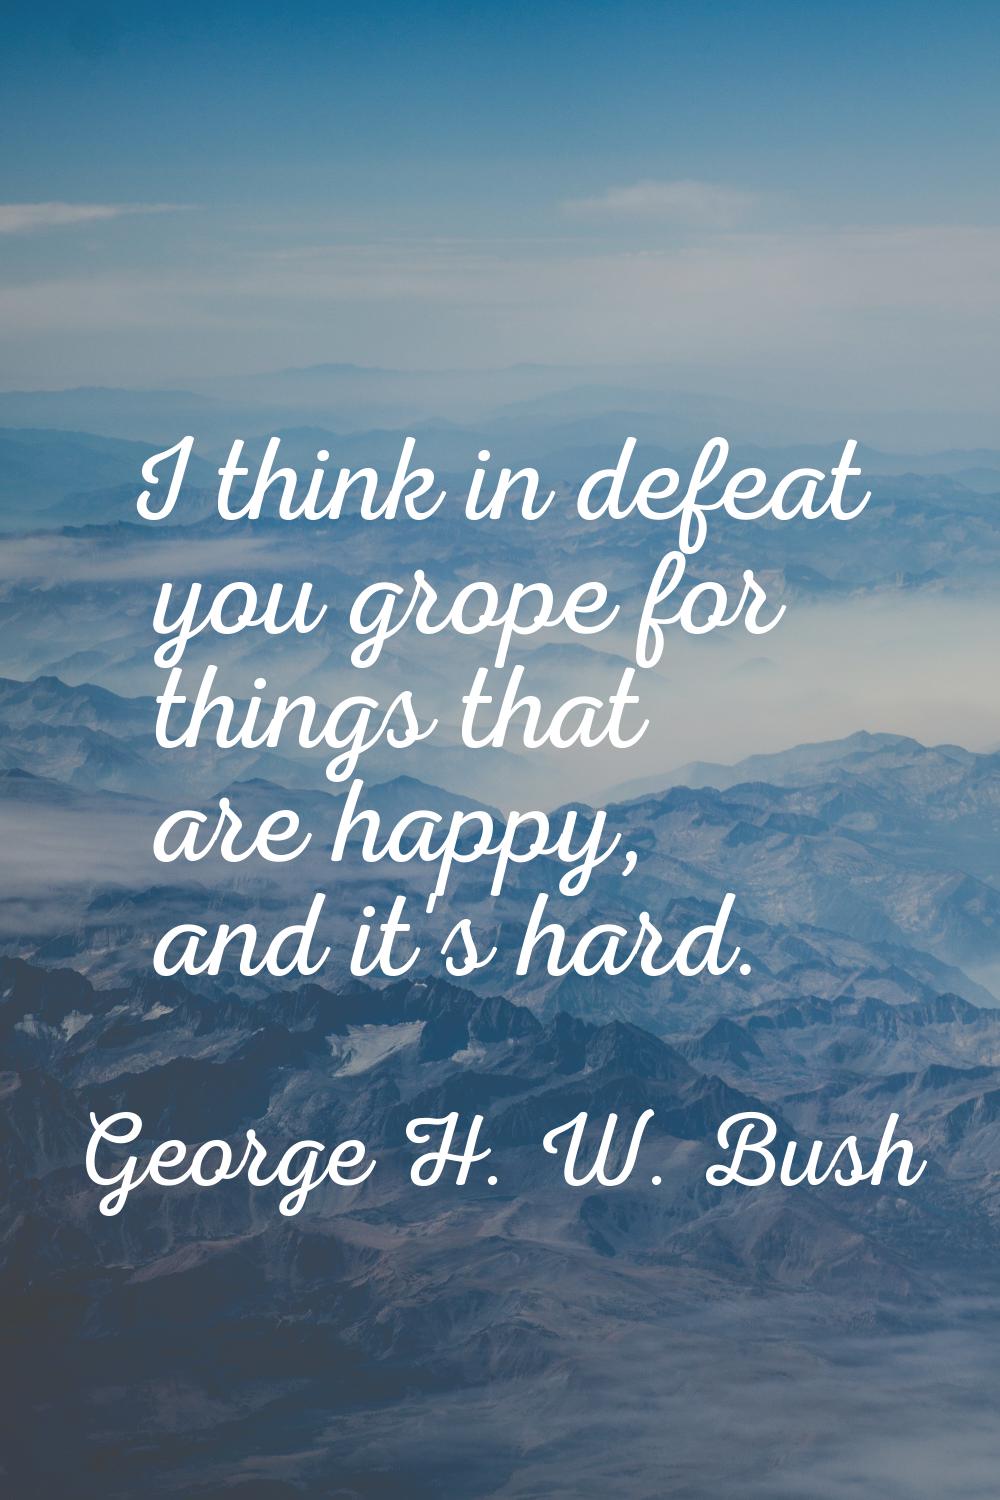 I think in defeat you grope for things that are happy, and it's hard.